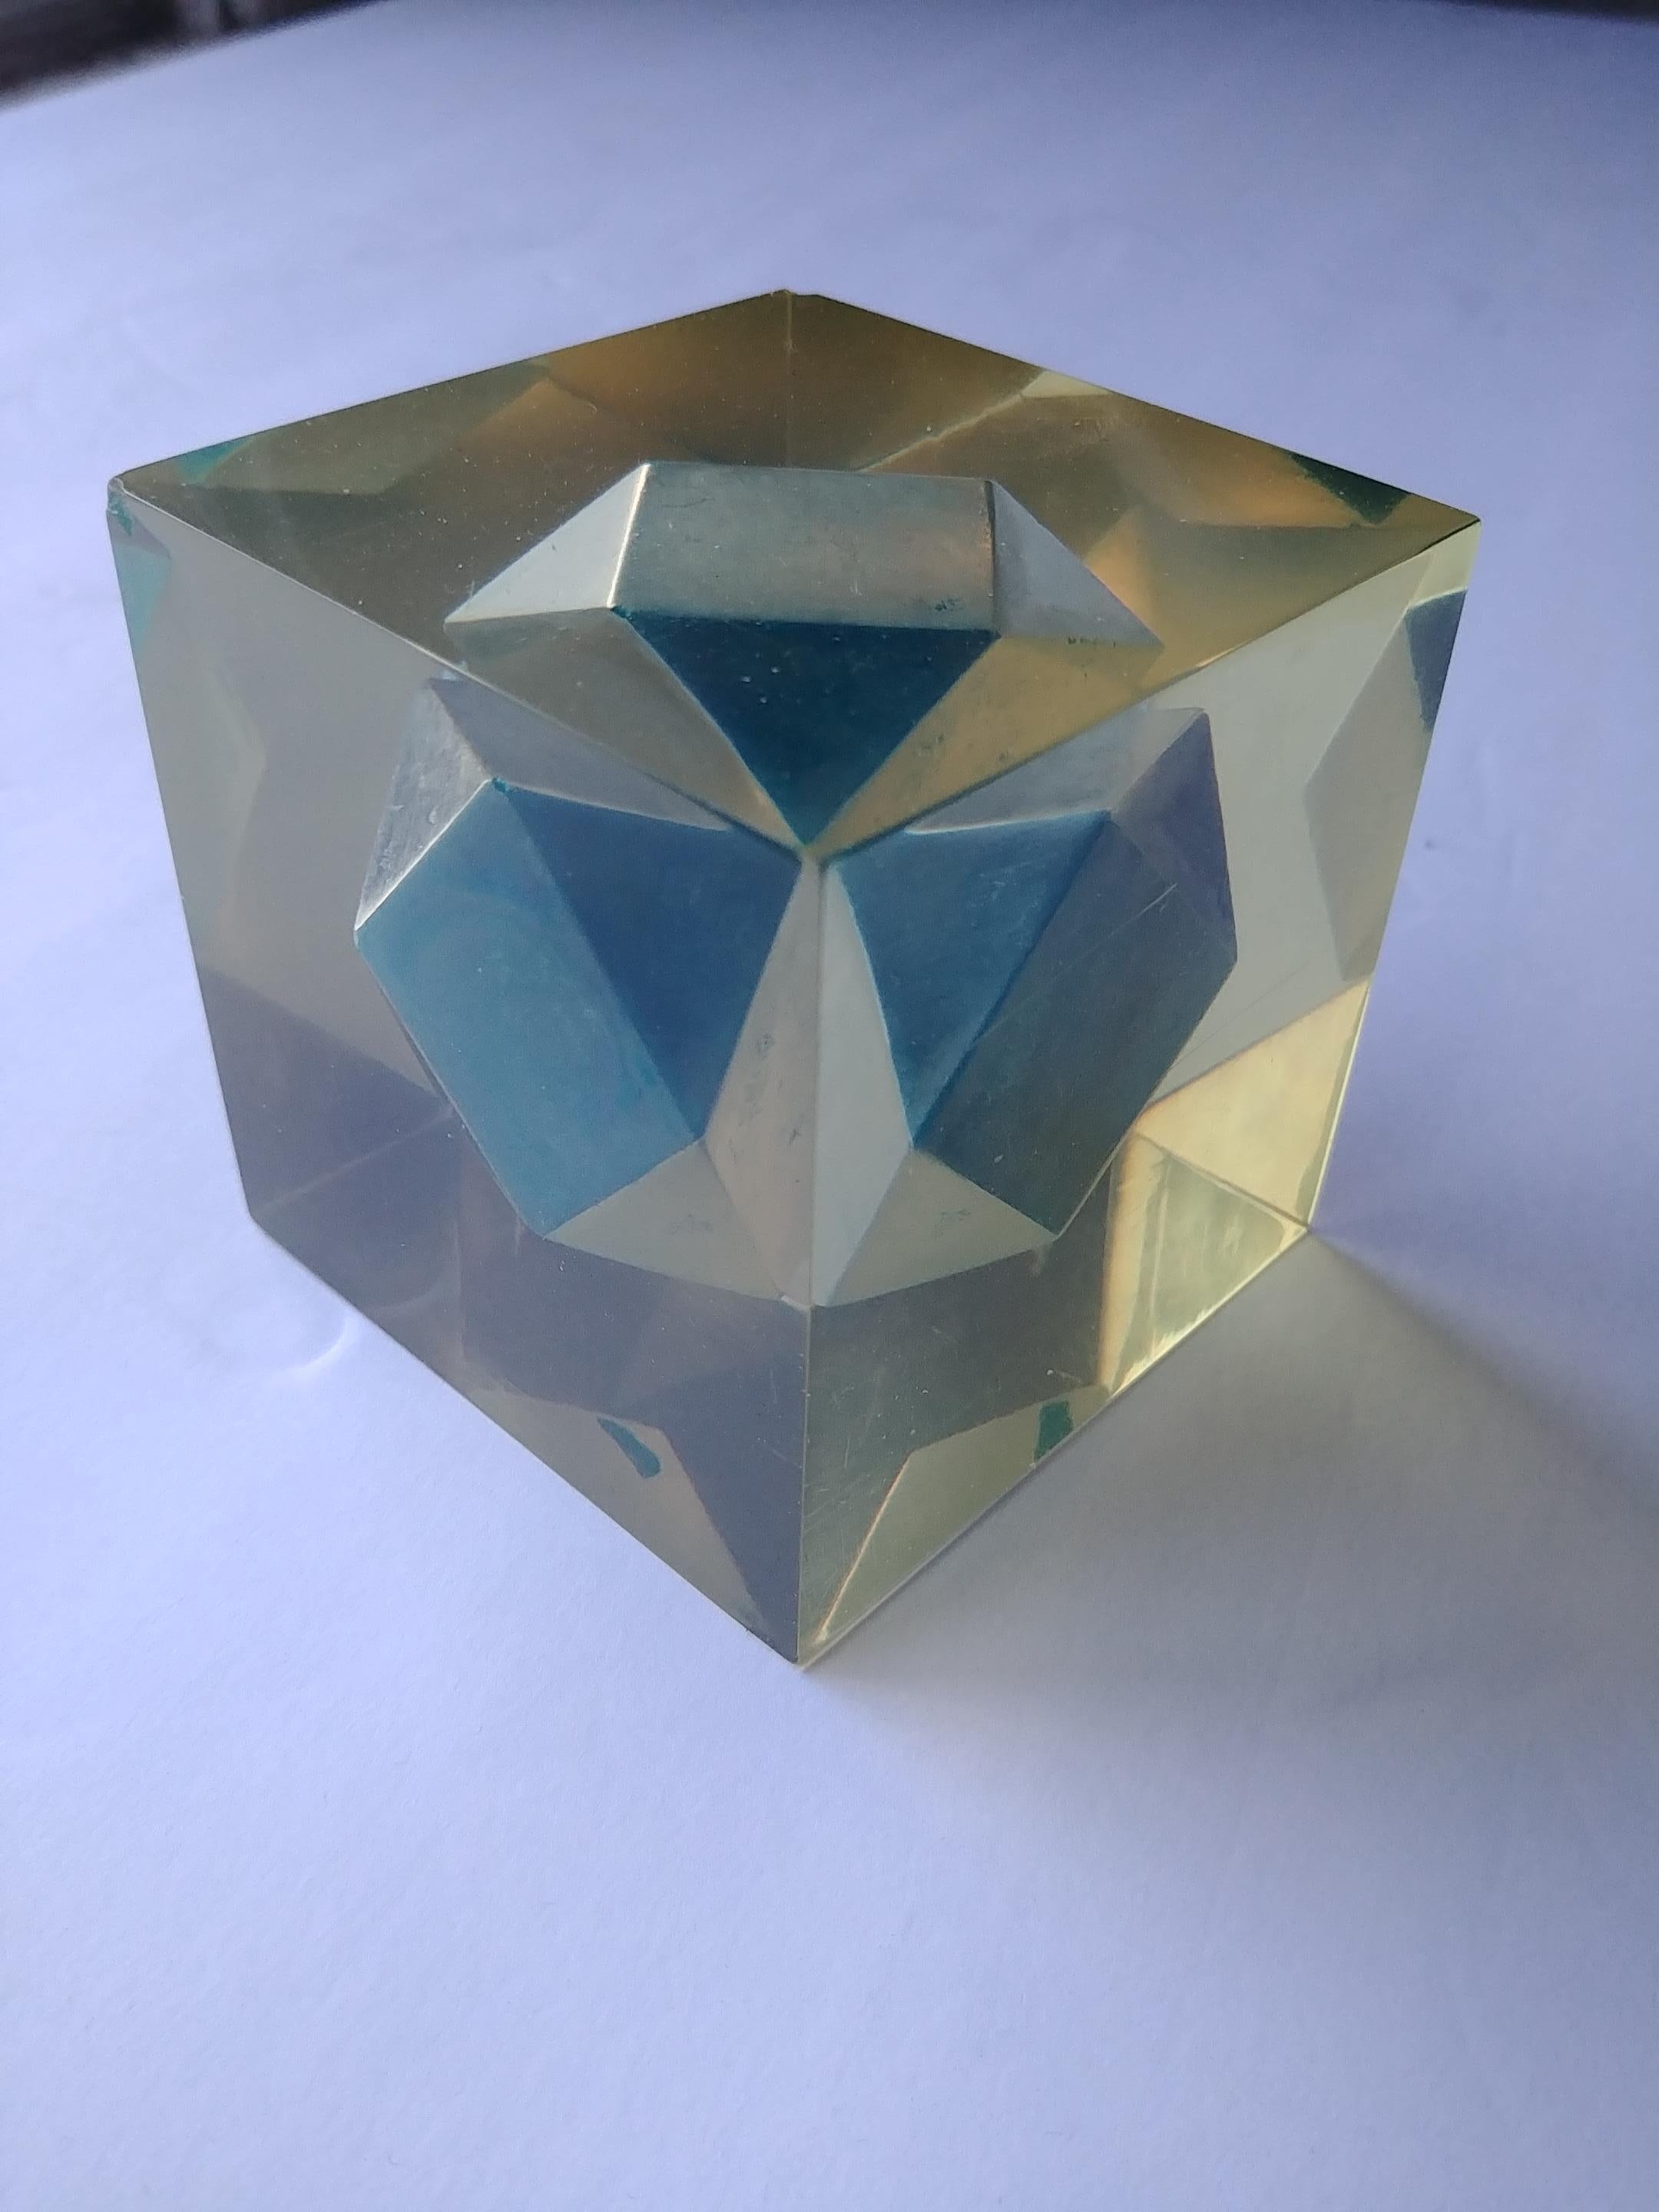 This is a very rare Mari resin cube from the 1950s, it measures in cm 7 x 7 x 7, has a couple of flee bites in 2 corners. Similar sample with black inside in Progressione di sculpture, Italy.